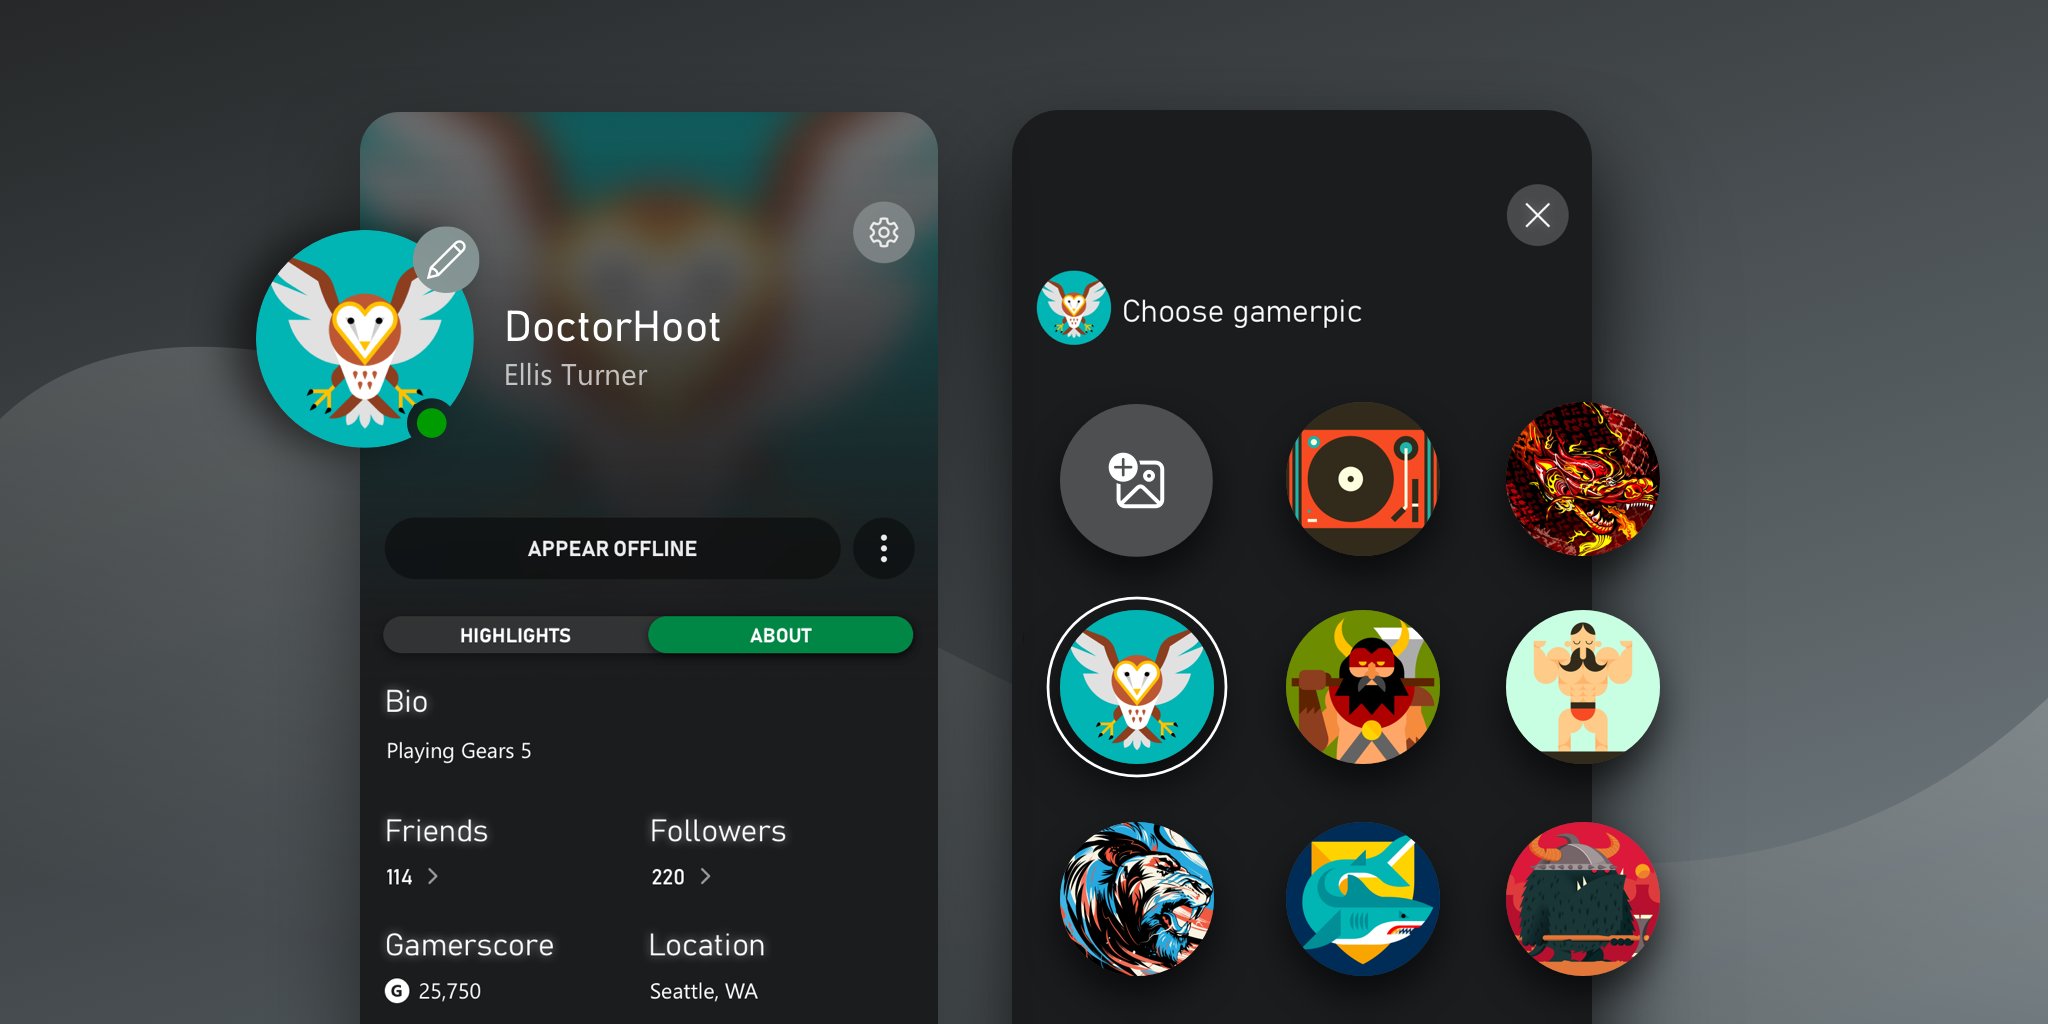 Now You Can Upload Custom Gamerpics On Xbox One